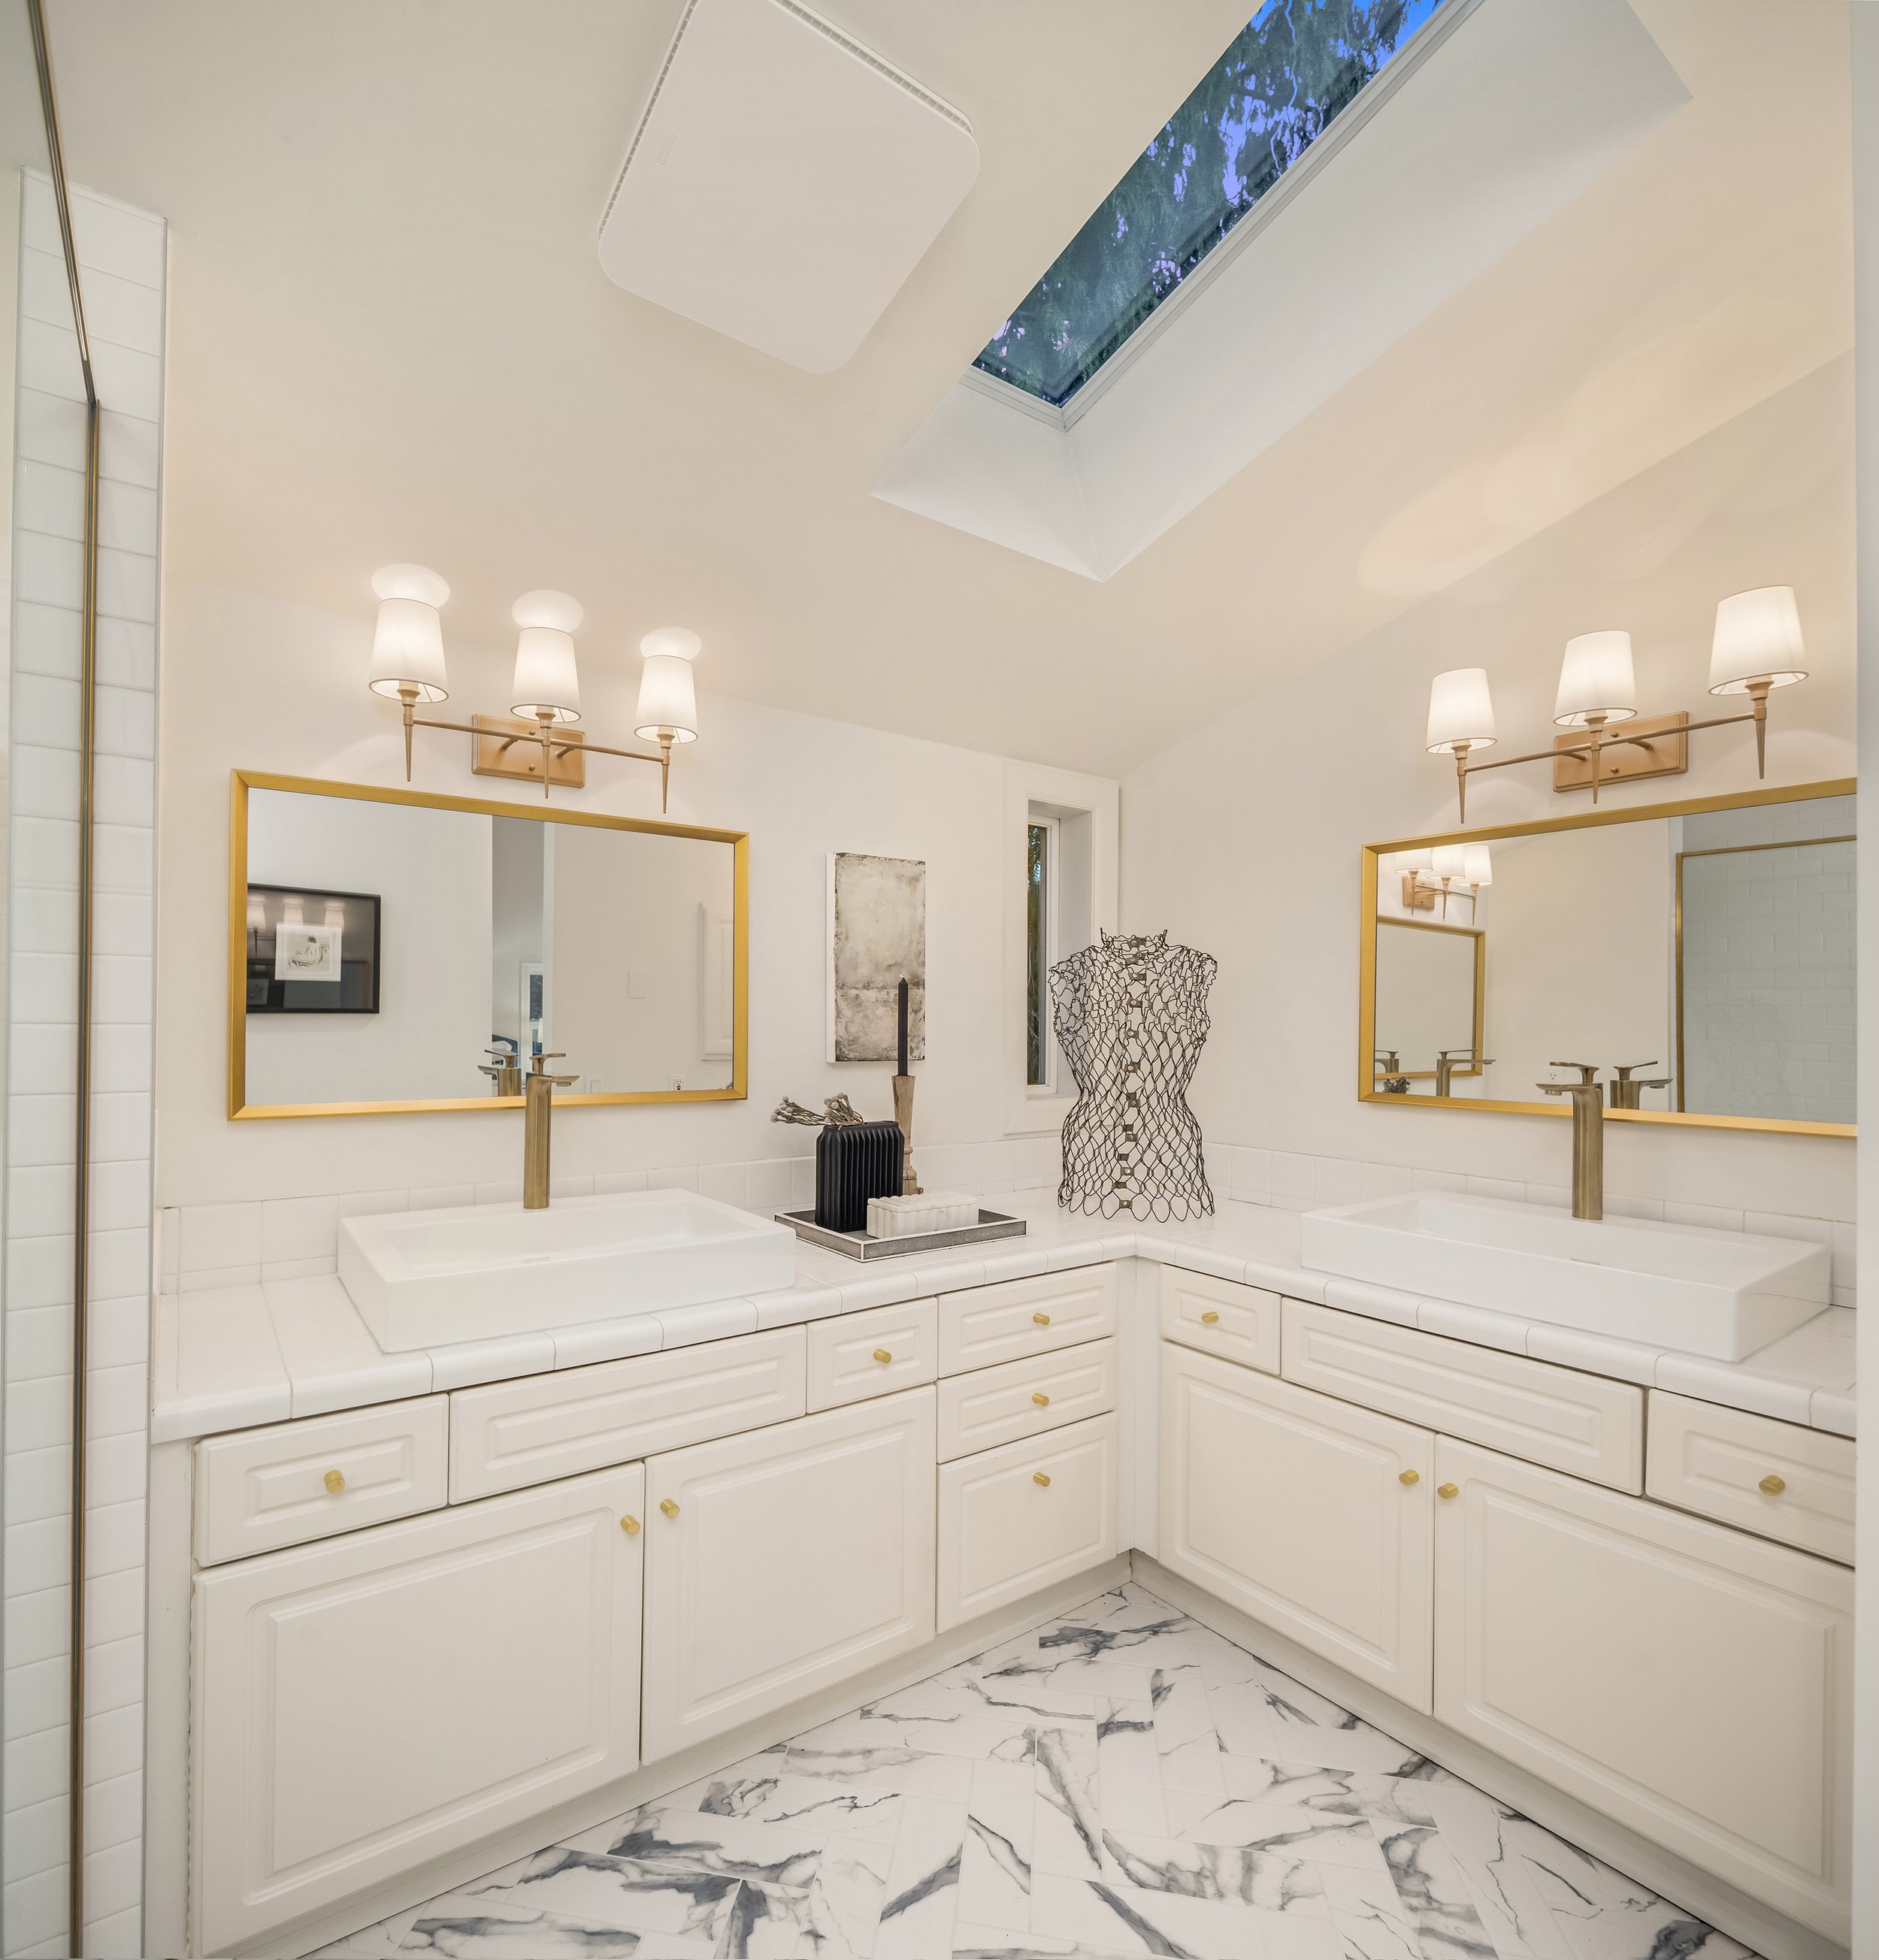  Recently updated primary suite bath. 